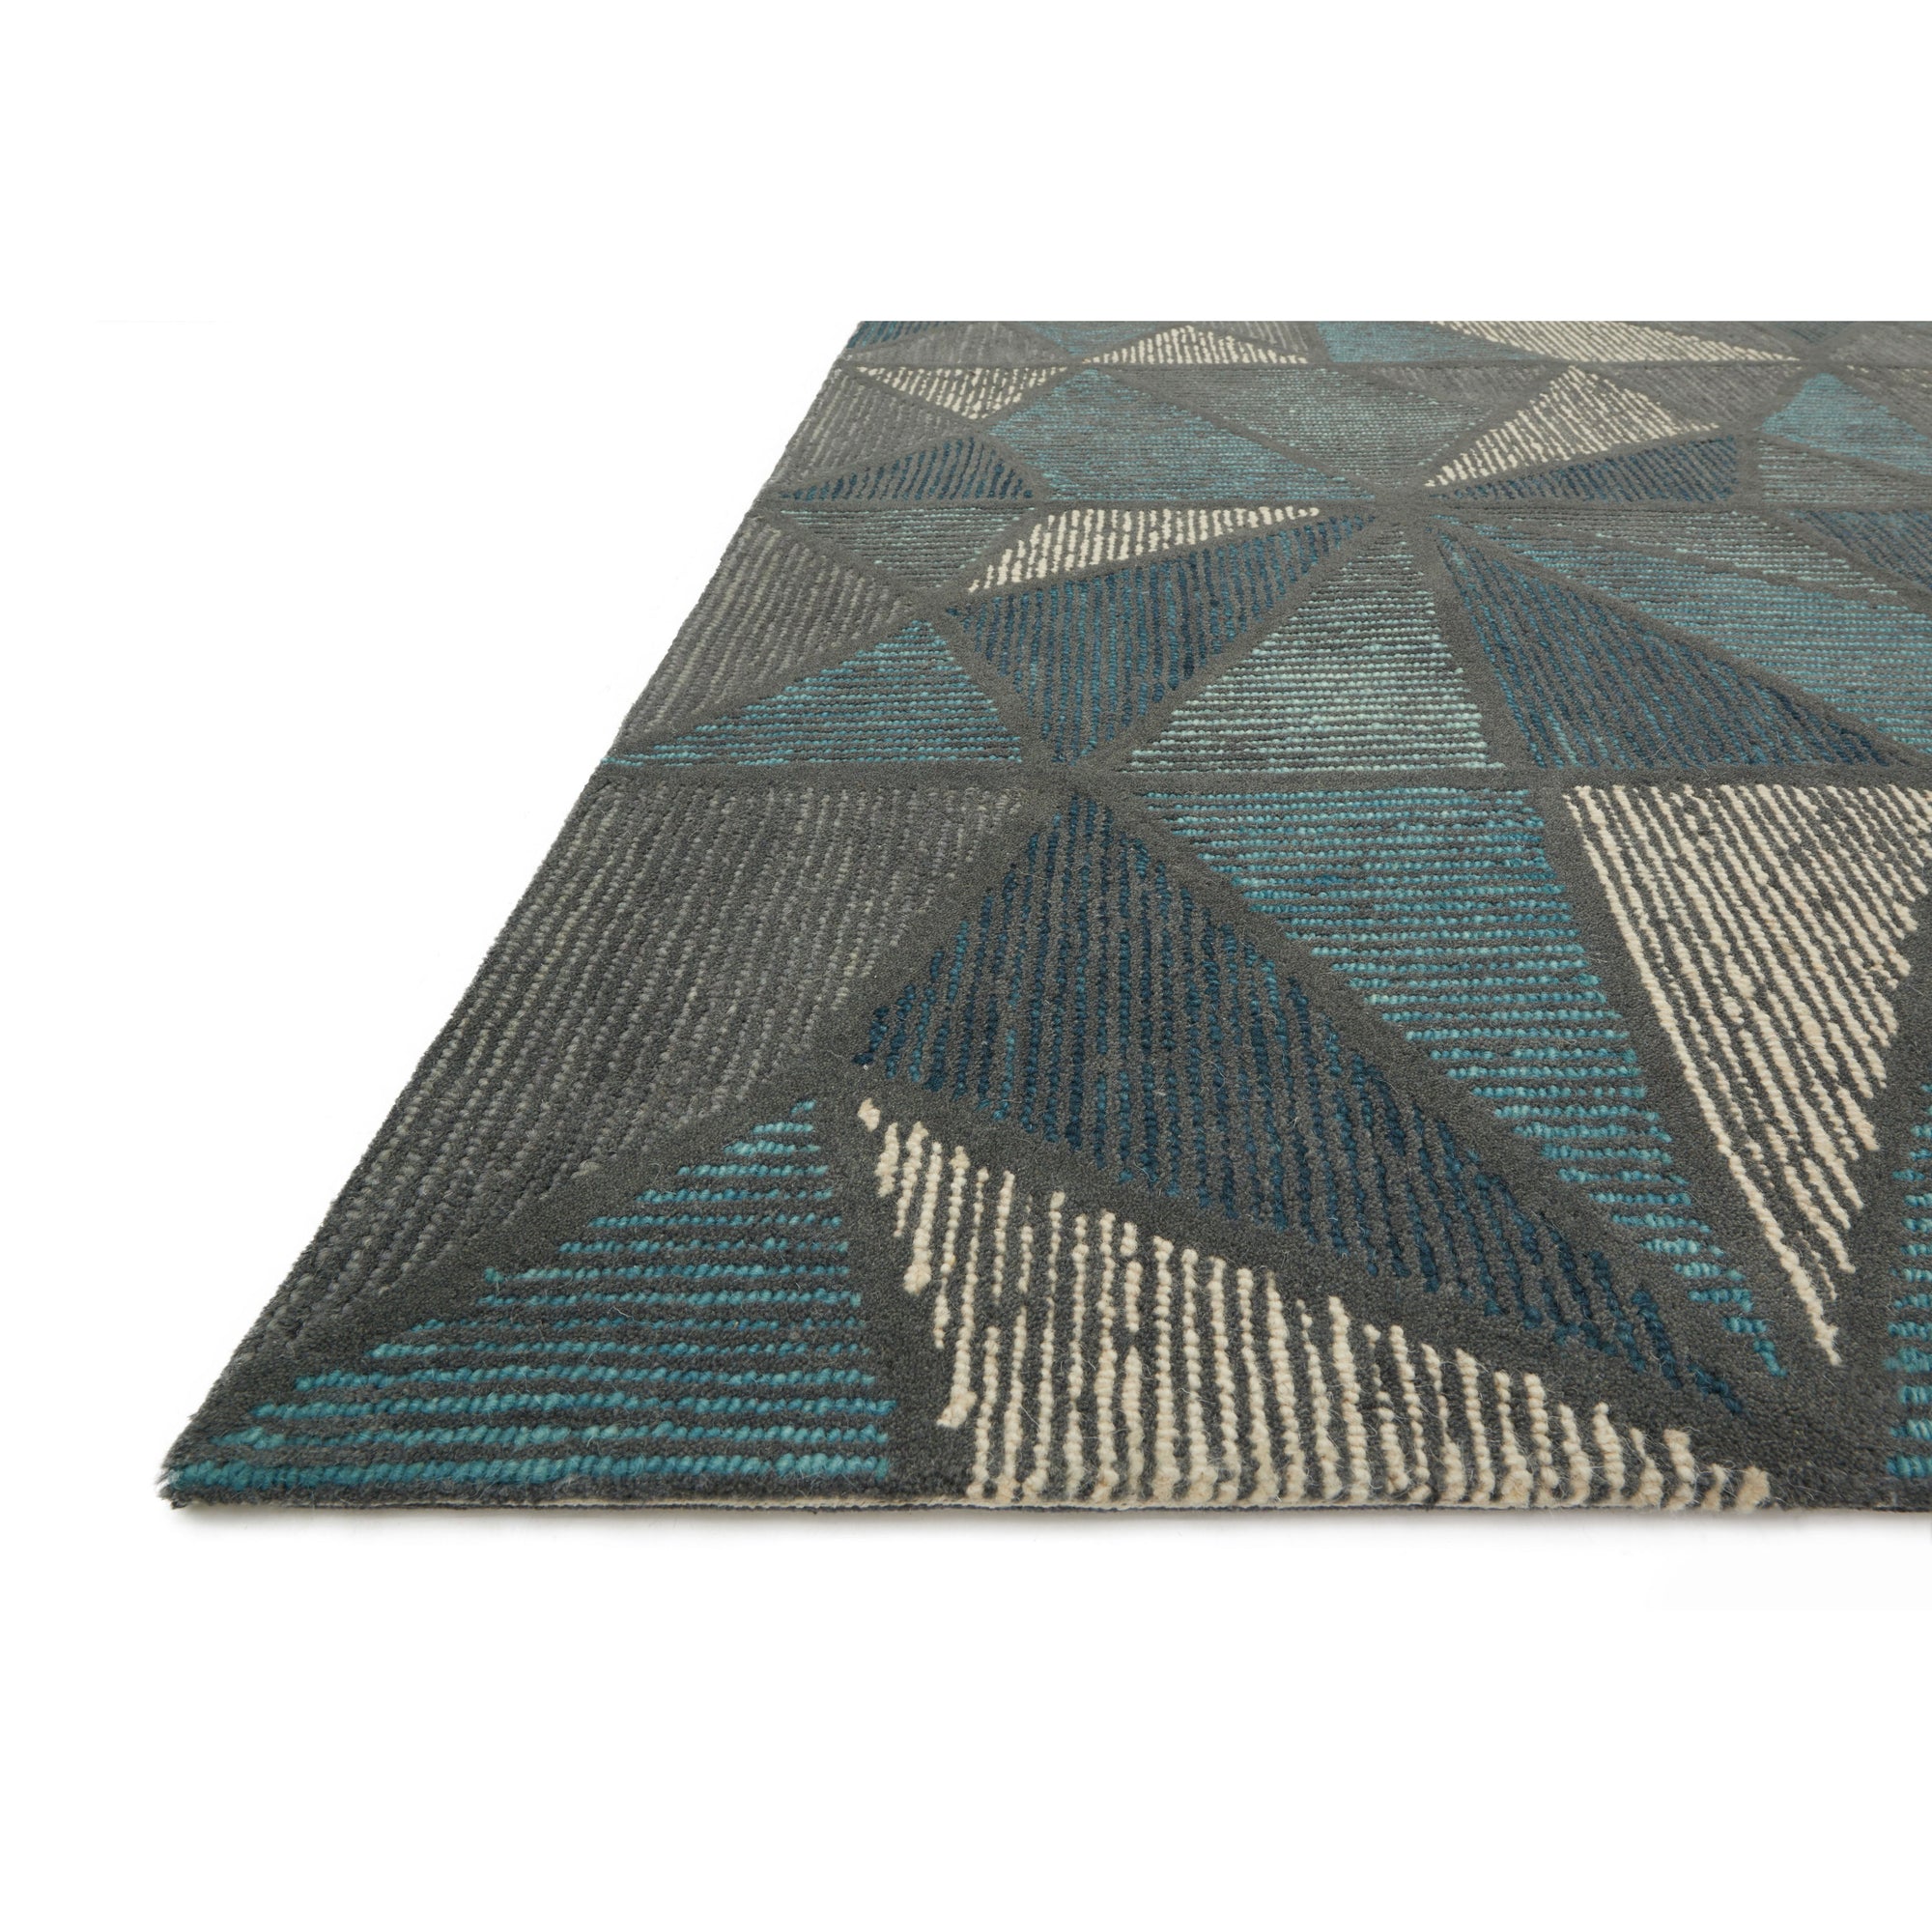 Rugs by Roo Loloi Gemology Teal Grey Area Rug in size 18" x 18" Sample